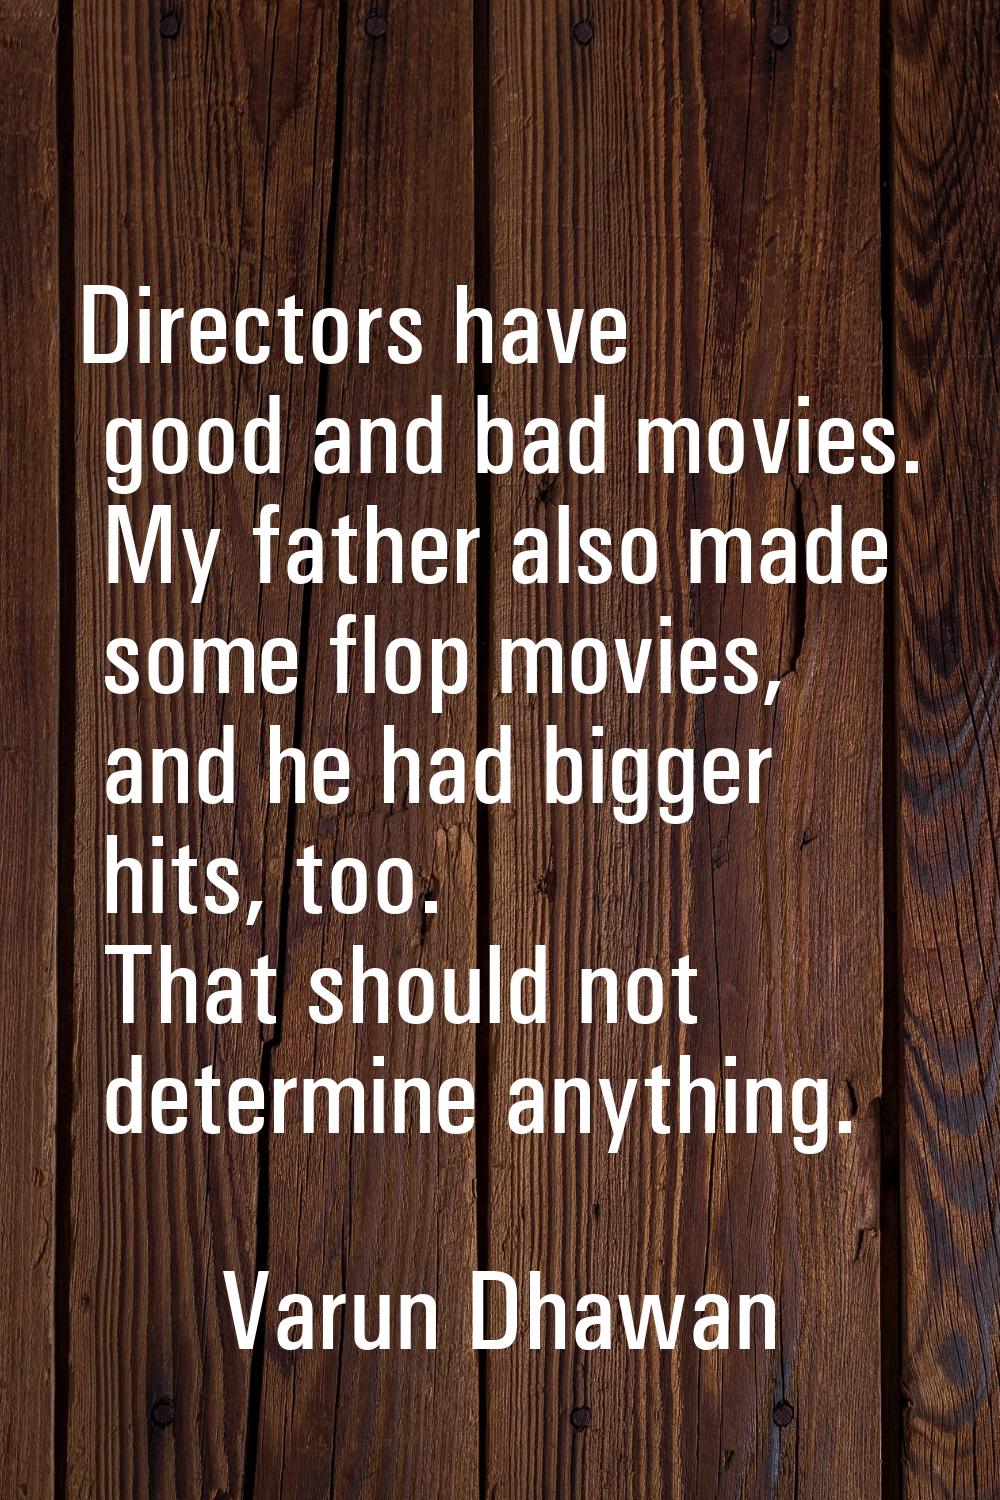 Directors have good and bad movies. My father also made some flop movies, and he had bigger hits, t